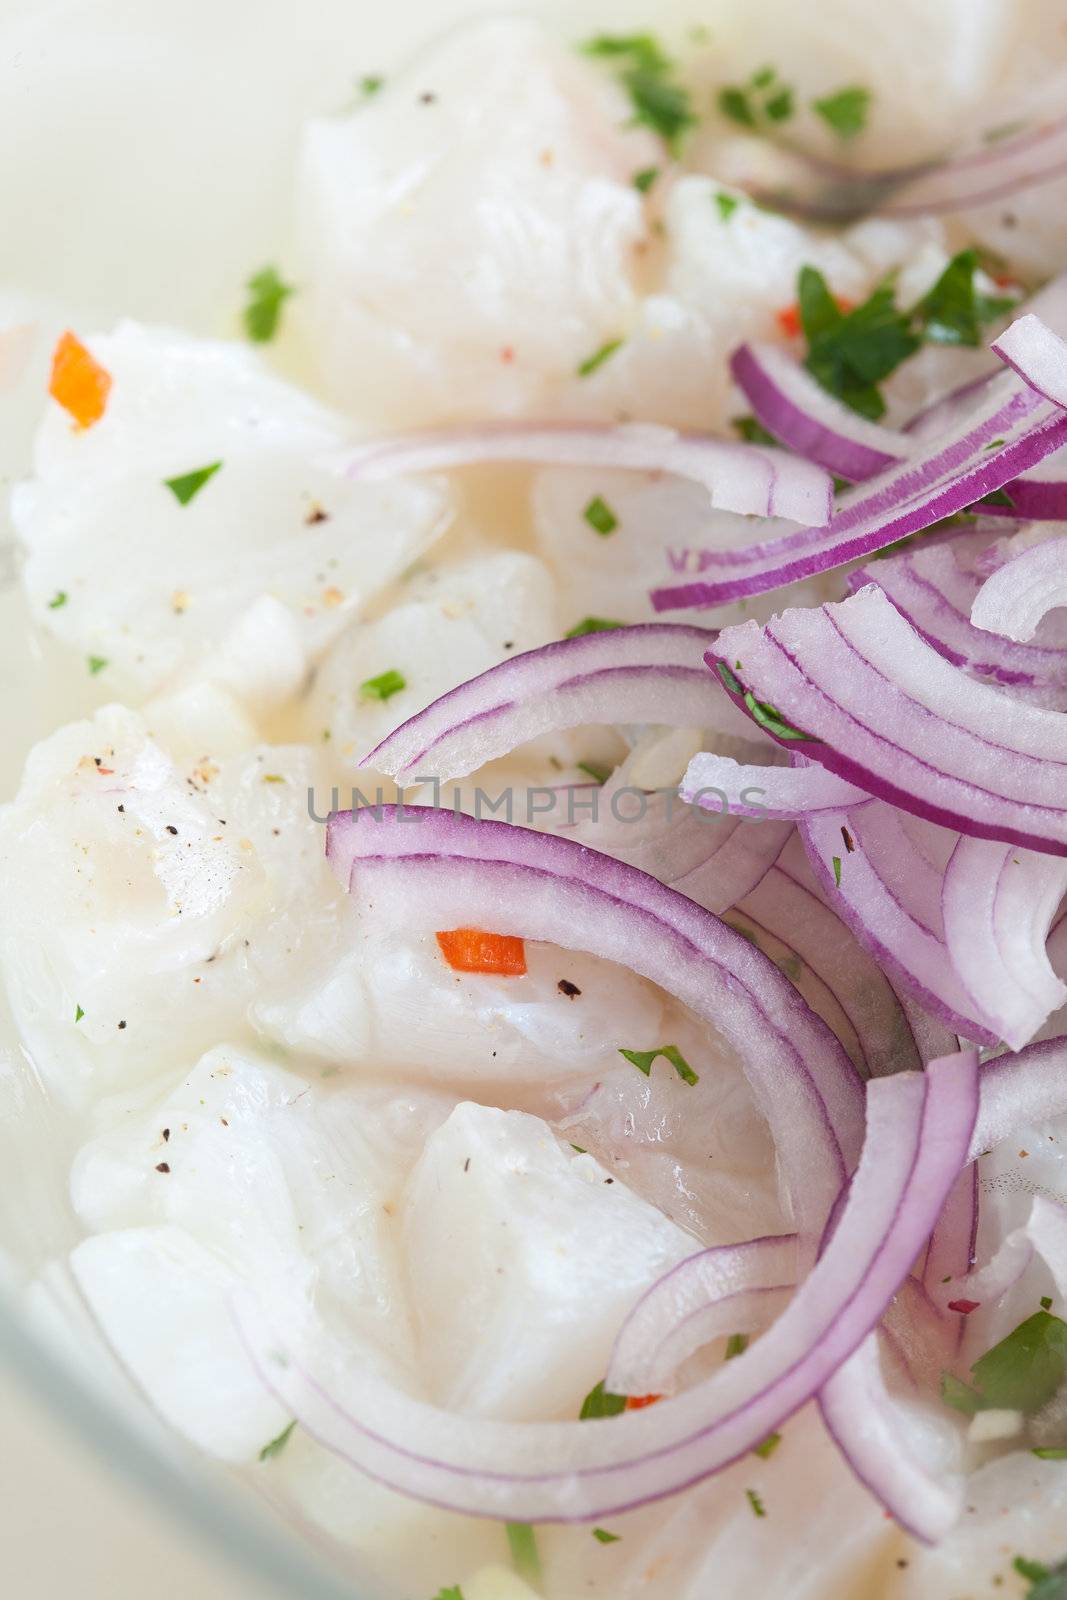 Bowl of ceviche marinating by Fotosmurf